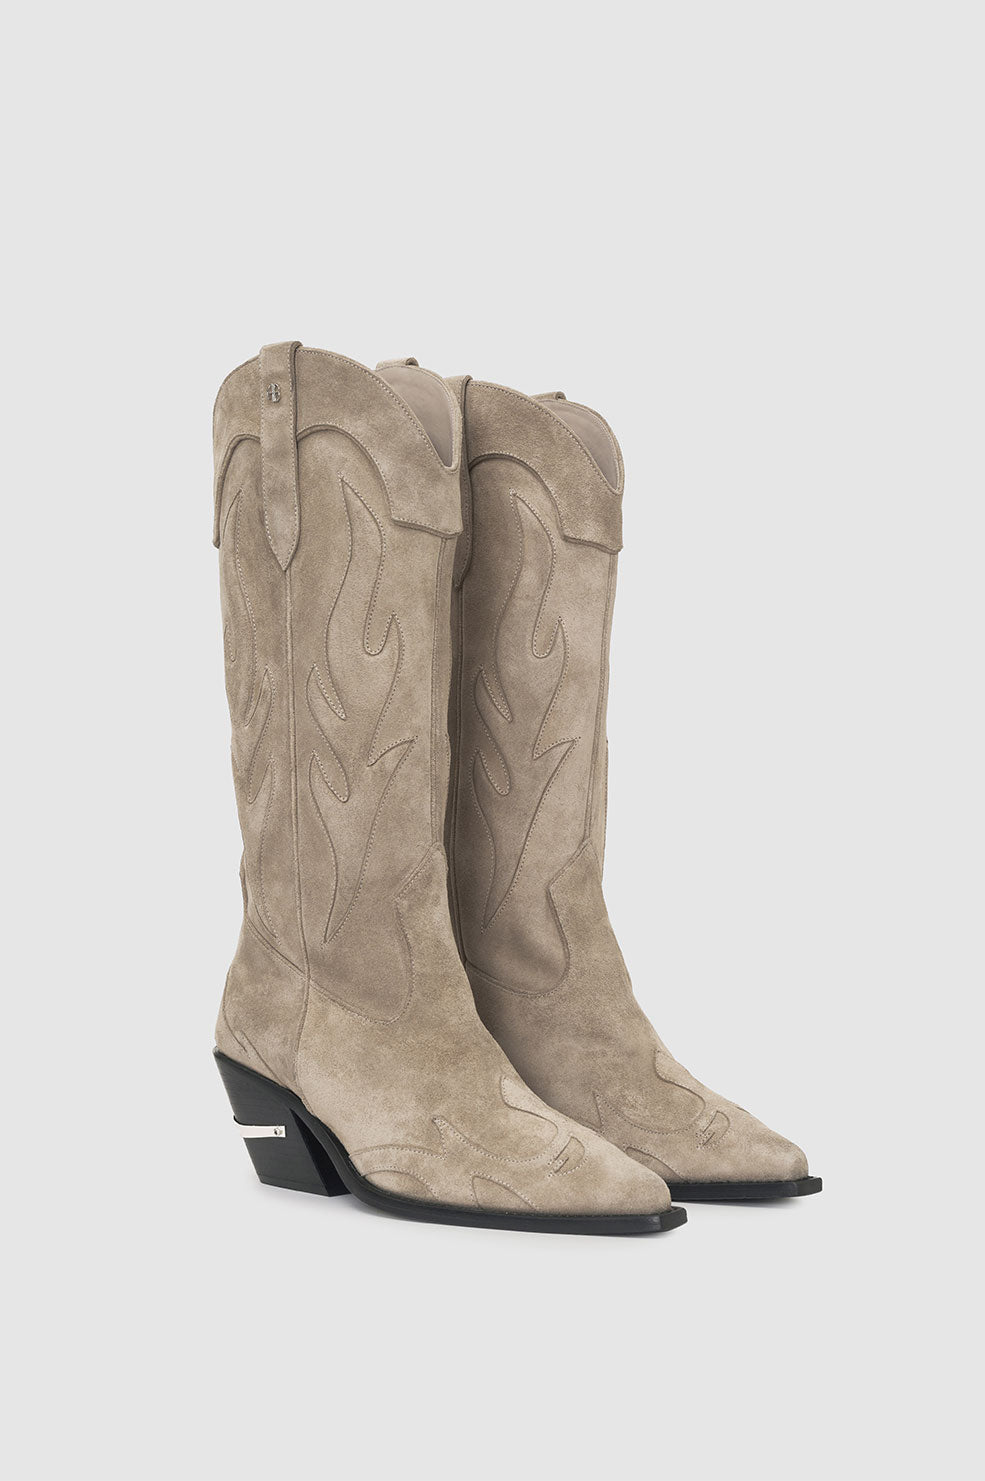 Anine Bing | Mid Calf Tania Boots - Taupe Western